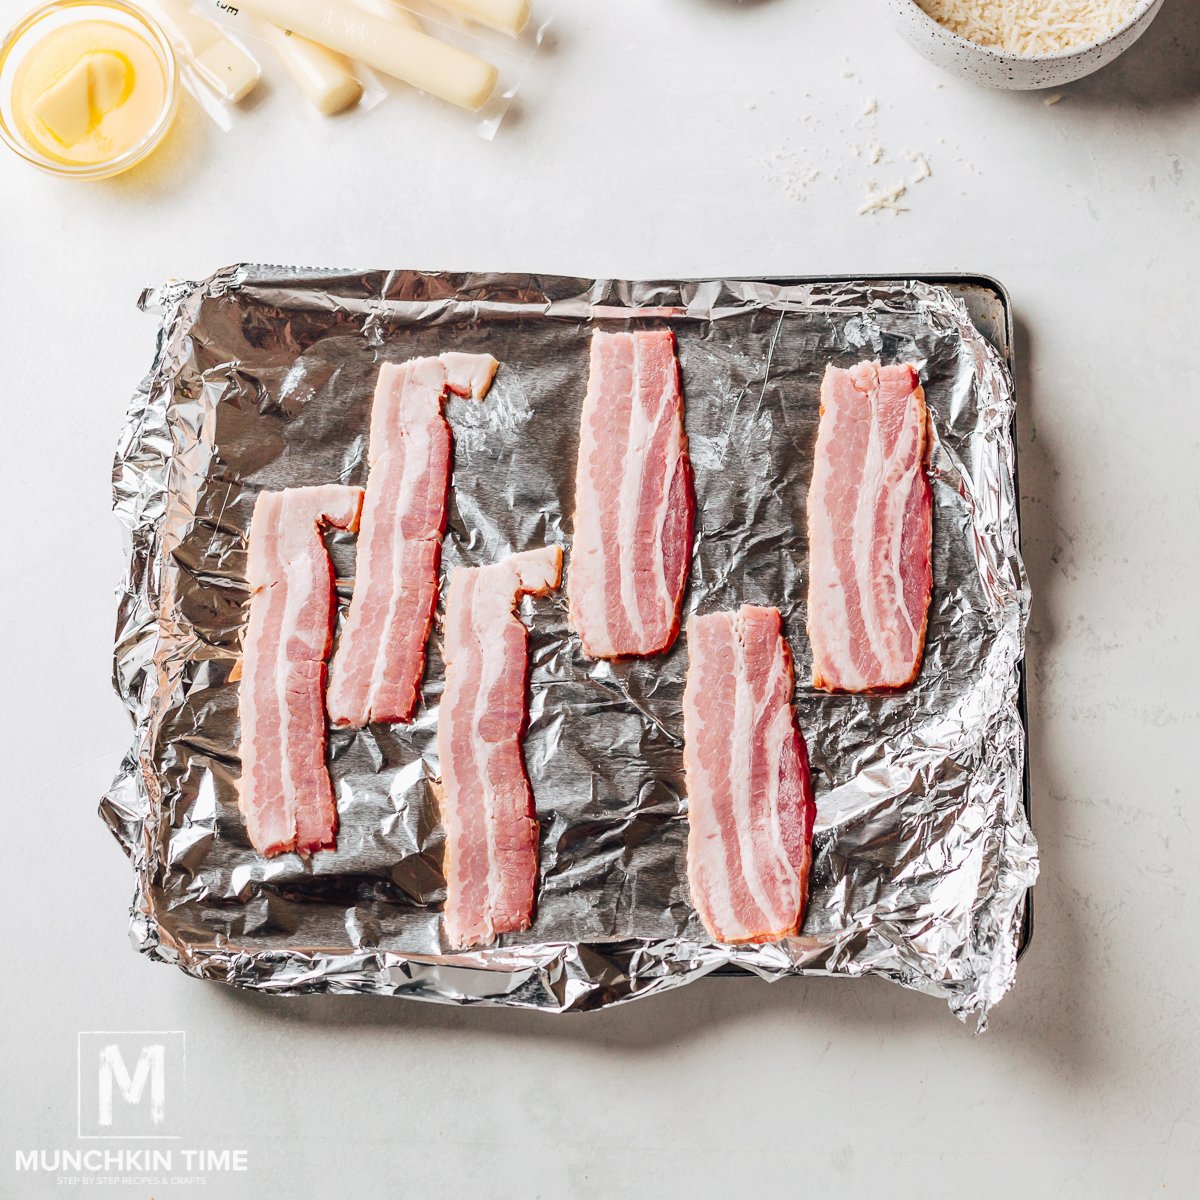 Baking bacon in the oven.